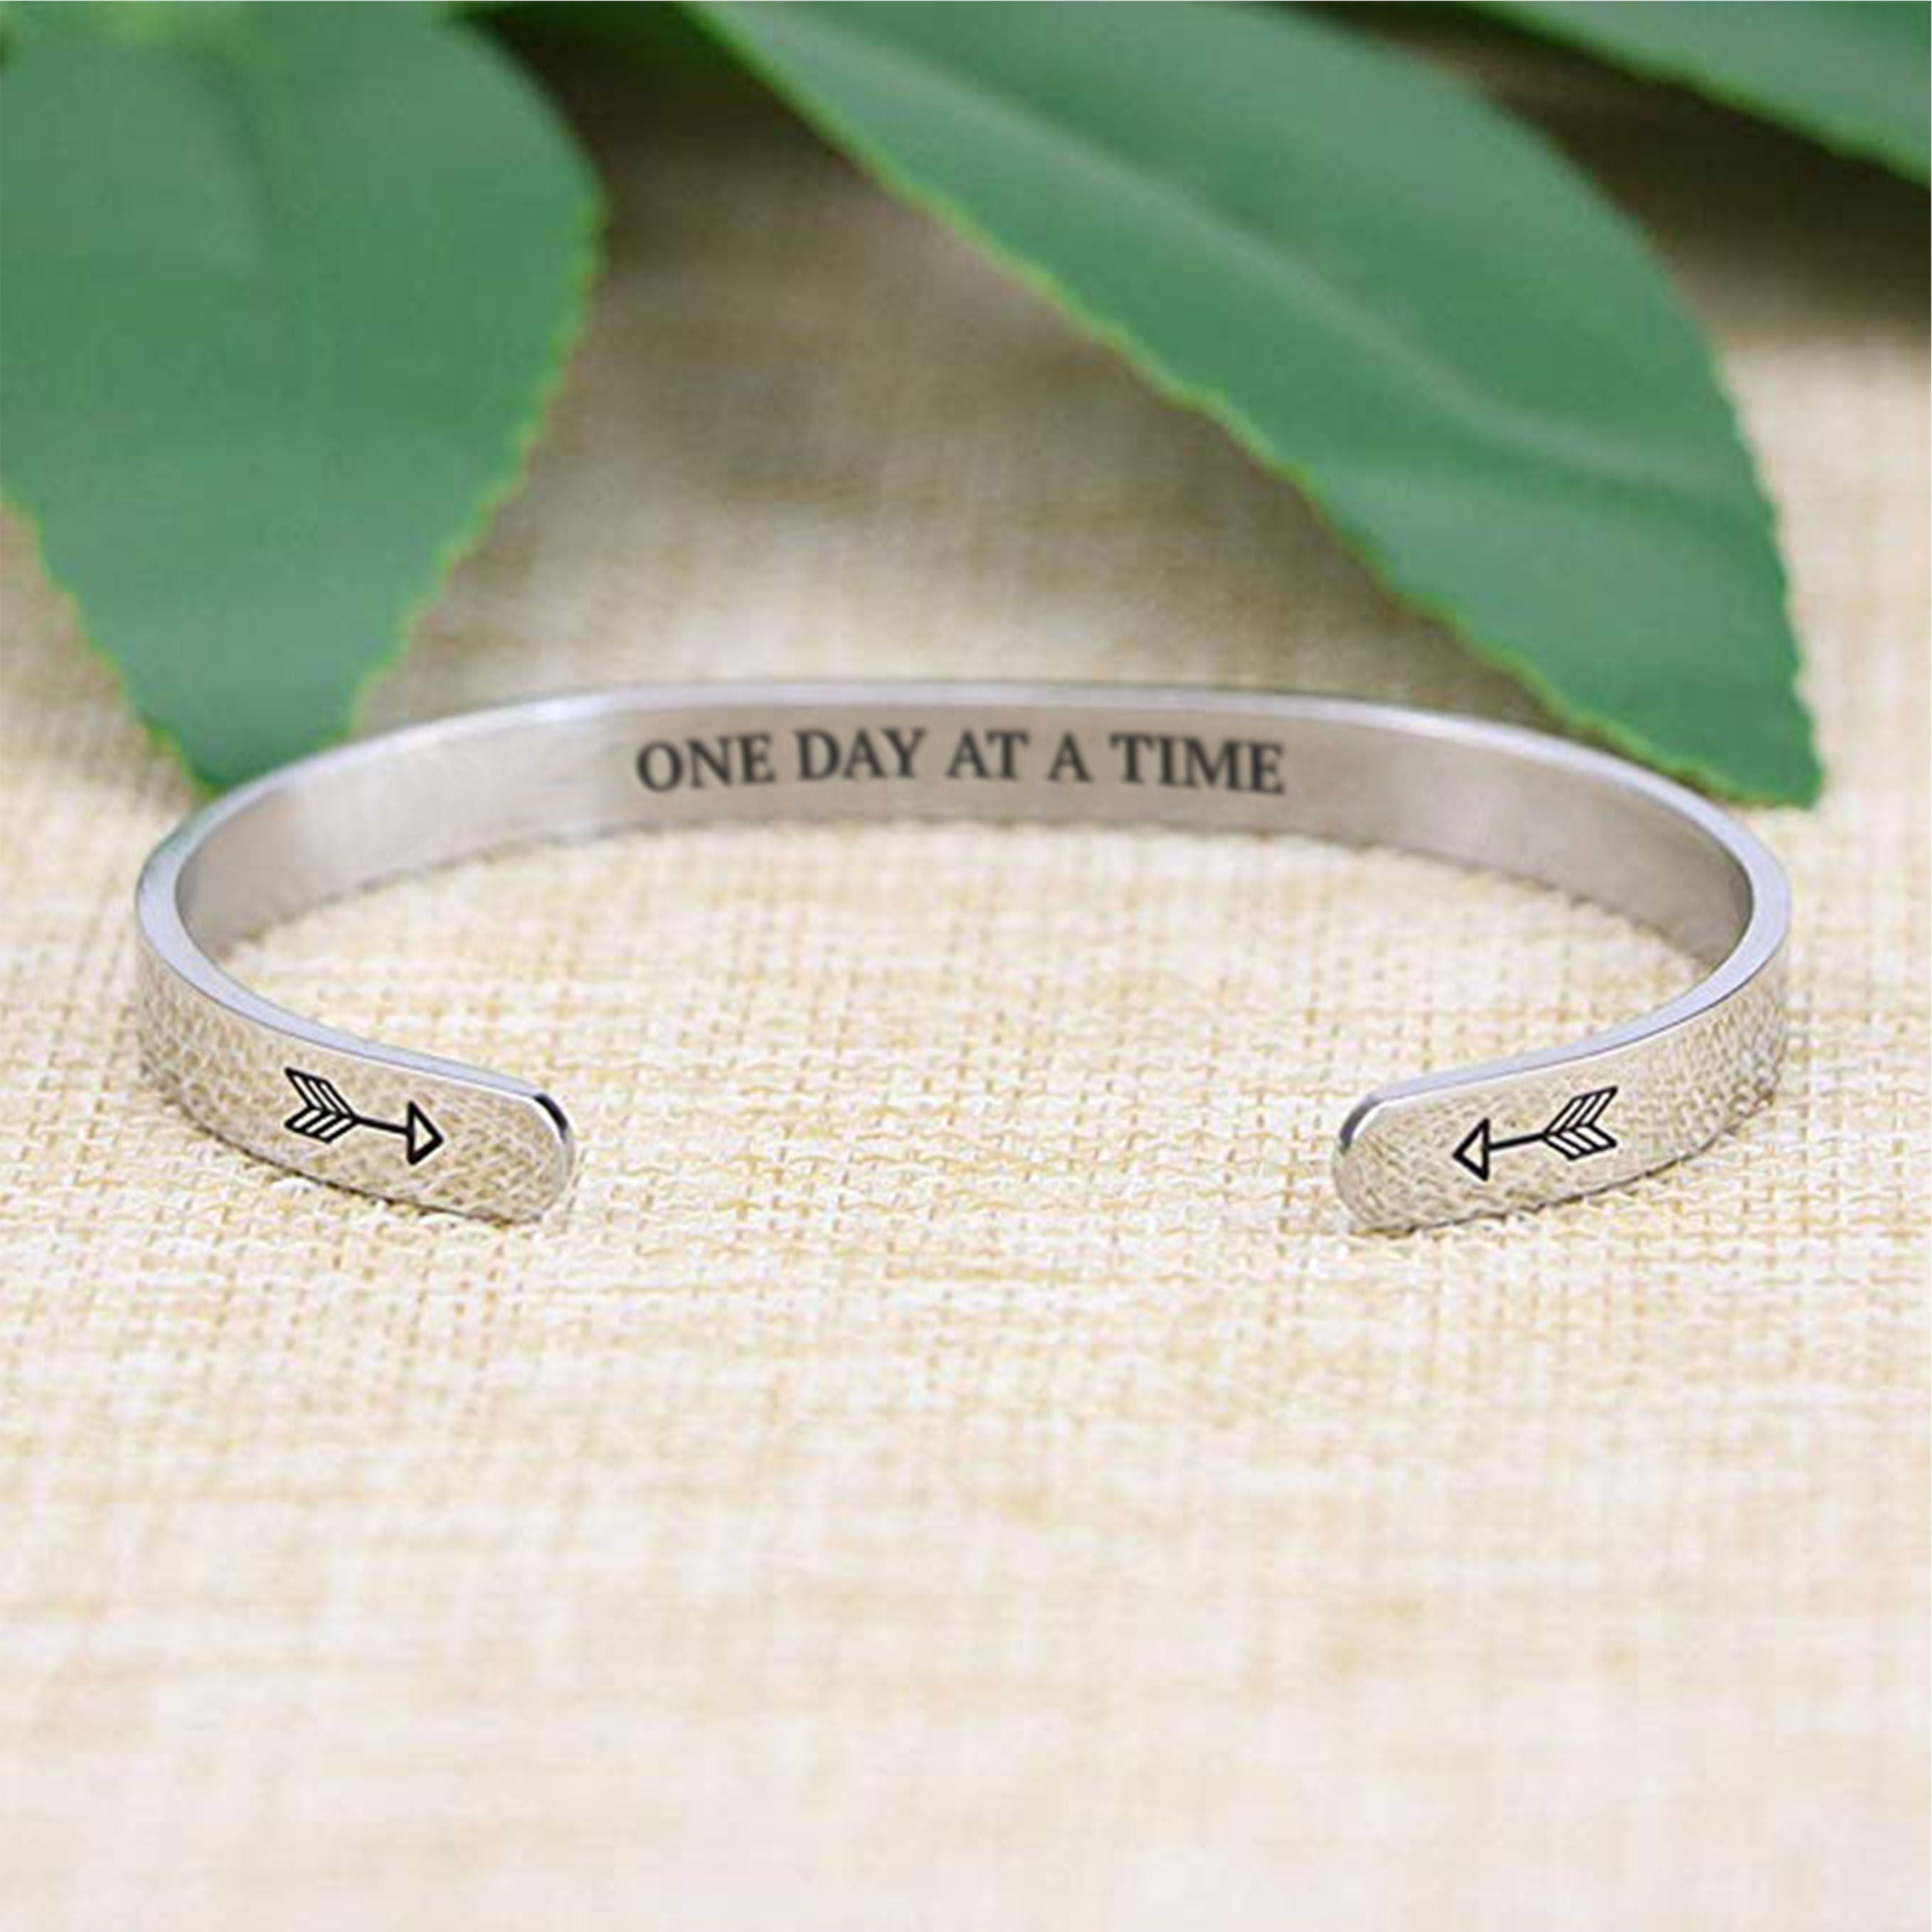 One day at a time bracelet with silver plating with arrows in focus on a burlap surface with a leafy background